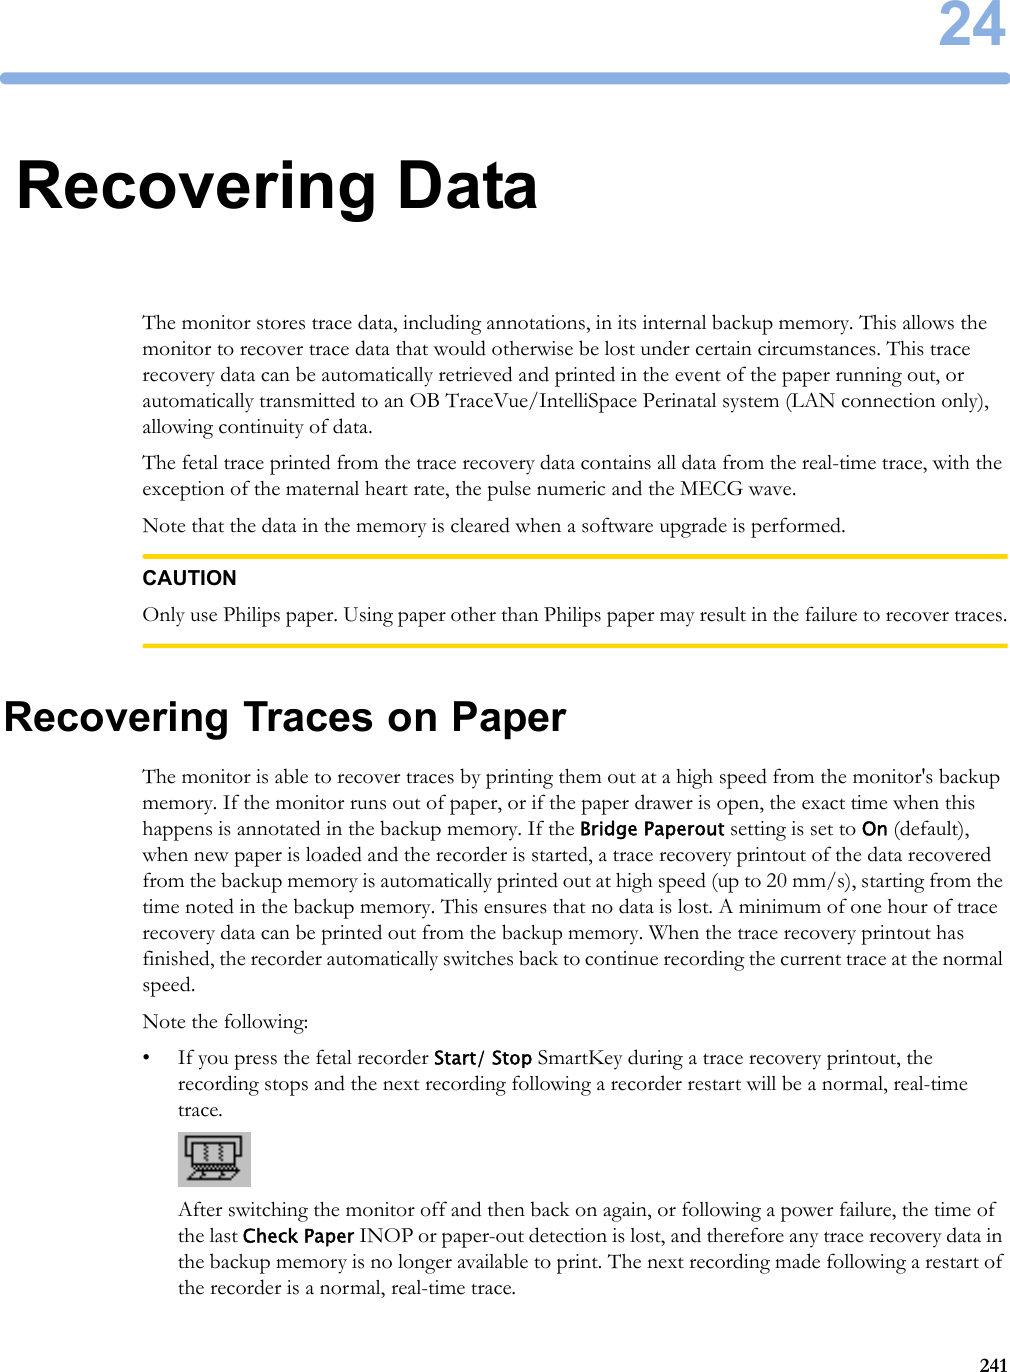 2424124Recovering DataThe monitor stores trace data, including annotations, in its internal backup memory. This allows the monitor to recover trace data that would otherwise be lost under certain circumstances. This trace recovery data can be automatically retrieved and printed in the event of the paper running out, or automatically transmitted to an OB TraceVue/IntelliSpace Perinatal system (LAN connection only), allowing continuity of data.The fetal trace printed from the trace recovery data contains all data from the real-time trace, with the exception of the maternal heart rate, the pulse numeric and the MECG wave.Note that the data in the memory is cleared when a software upgrade is performed.CAUTIONOnly use Philips paper. Using paper other than Philips paper may result in the failure to recover traces.Recovering Traces on PaperThe monitor is able to recover traces by printing them out at a high speed from the monitor&apos;s backup memory. If the monitor runs out of paper, or if the paper drawer is open, the exact time when this happens is annotated in the backup memory. If the Bridge Paperout setting is set to On (default), when new paper is loaded and the recorder is started, a trace recovery printout of the data recovered from the backup memory is automatically printed out at high speed (up to 20 mm/s), starting from the time noted in the backup memory. This ensures that no data is lost. A minimum of one hour of trace recovery data can be printed out from the backup memory. When the trace recovery printout has finished, the recorder automatically switches back to continue recording the current trace at the normal speed.Note the following:• If you press the fetal recorder Start/ Stop SmartKey during a trace recovery printout, the recording stops and the next recording following a recorder restart will be a normal, real-time trace.After switching the monitor off and then back on again, or following a power failure, the time of the last Check Paper INOP or paper-out detection is lost, and therefore any trace recovery data in the backup memory is no longer available to print. The next recording made following a restart of the recorder is a normal, real-time trace.